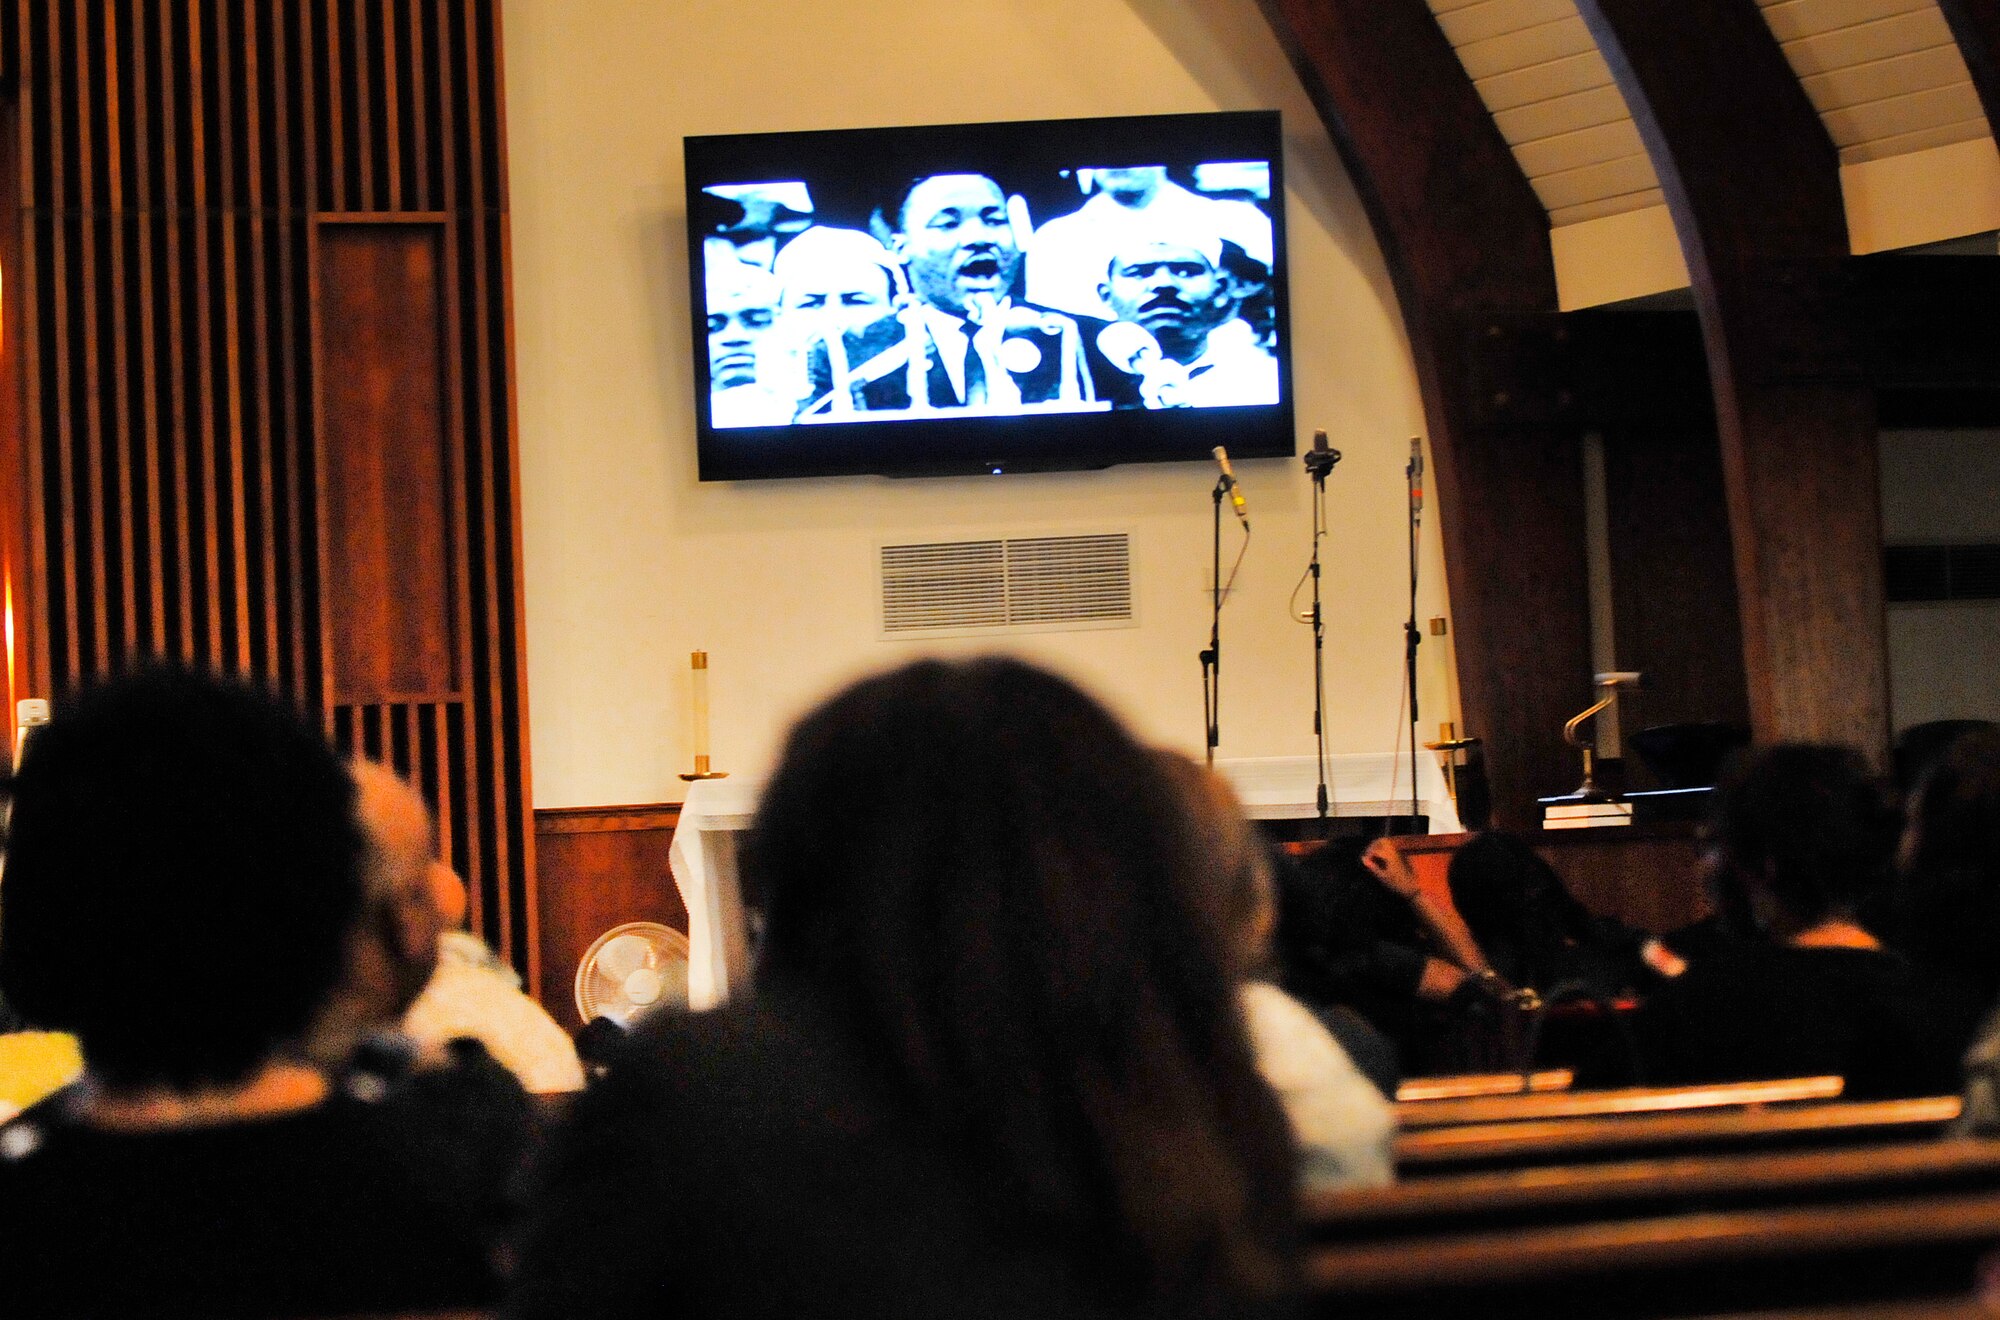 The Dr. Martin Luther King, Jr. commemorative service, "Celebrating Diversity in the Legacy of Dr. King", was Jan. 17 at Robins Chapel. Attendees watch Dr. King's "I Have A Dream" speech. (U. S. Air Force photo/Sue Sapp)